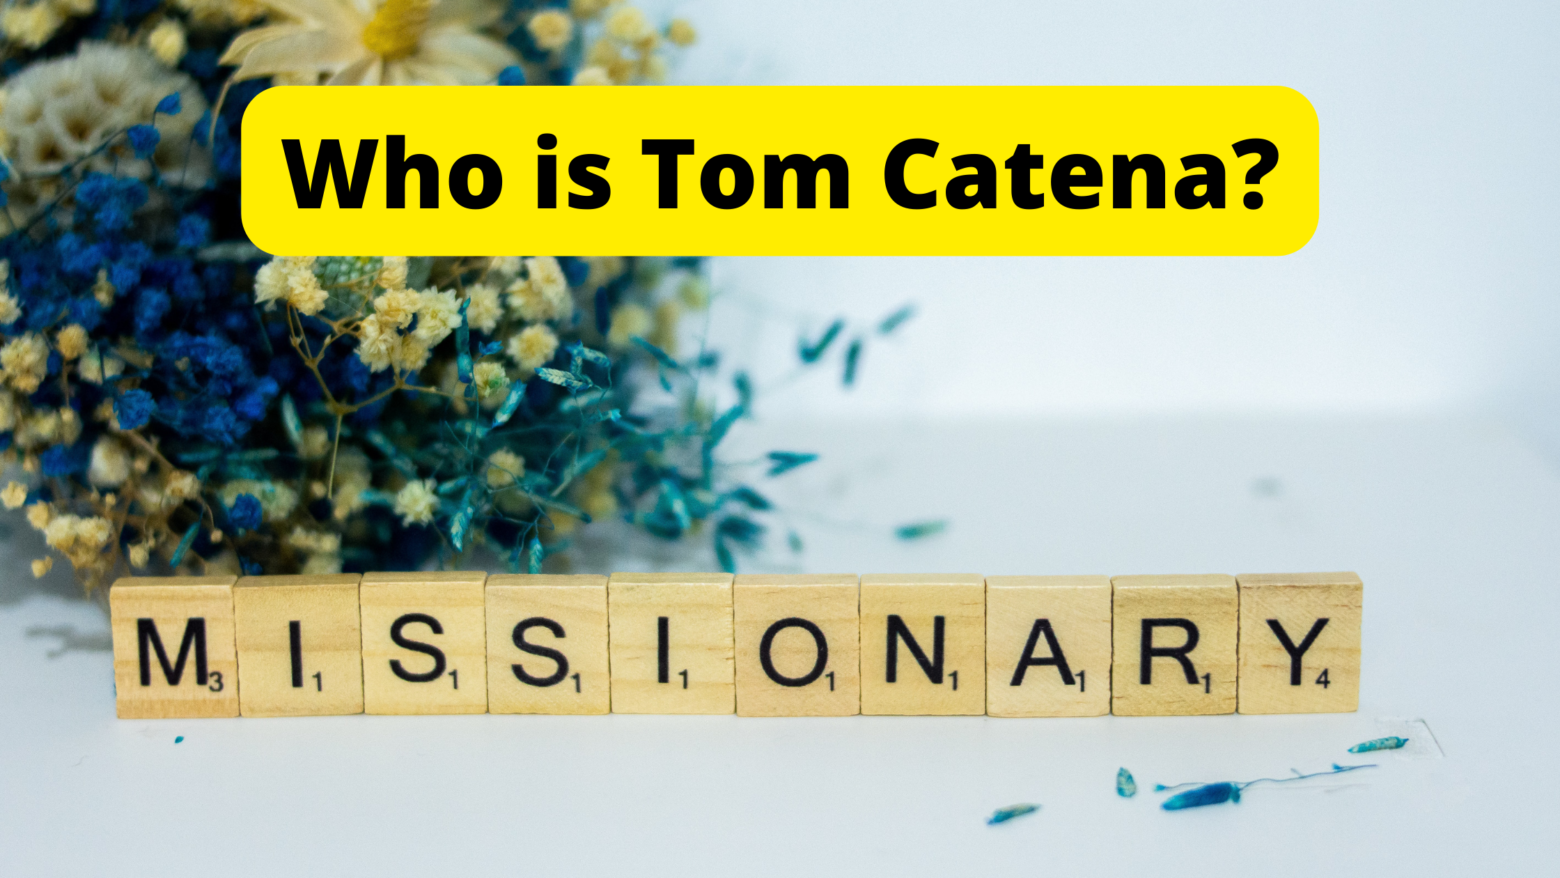 Who is Tom Catena?